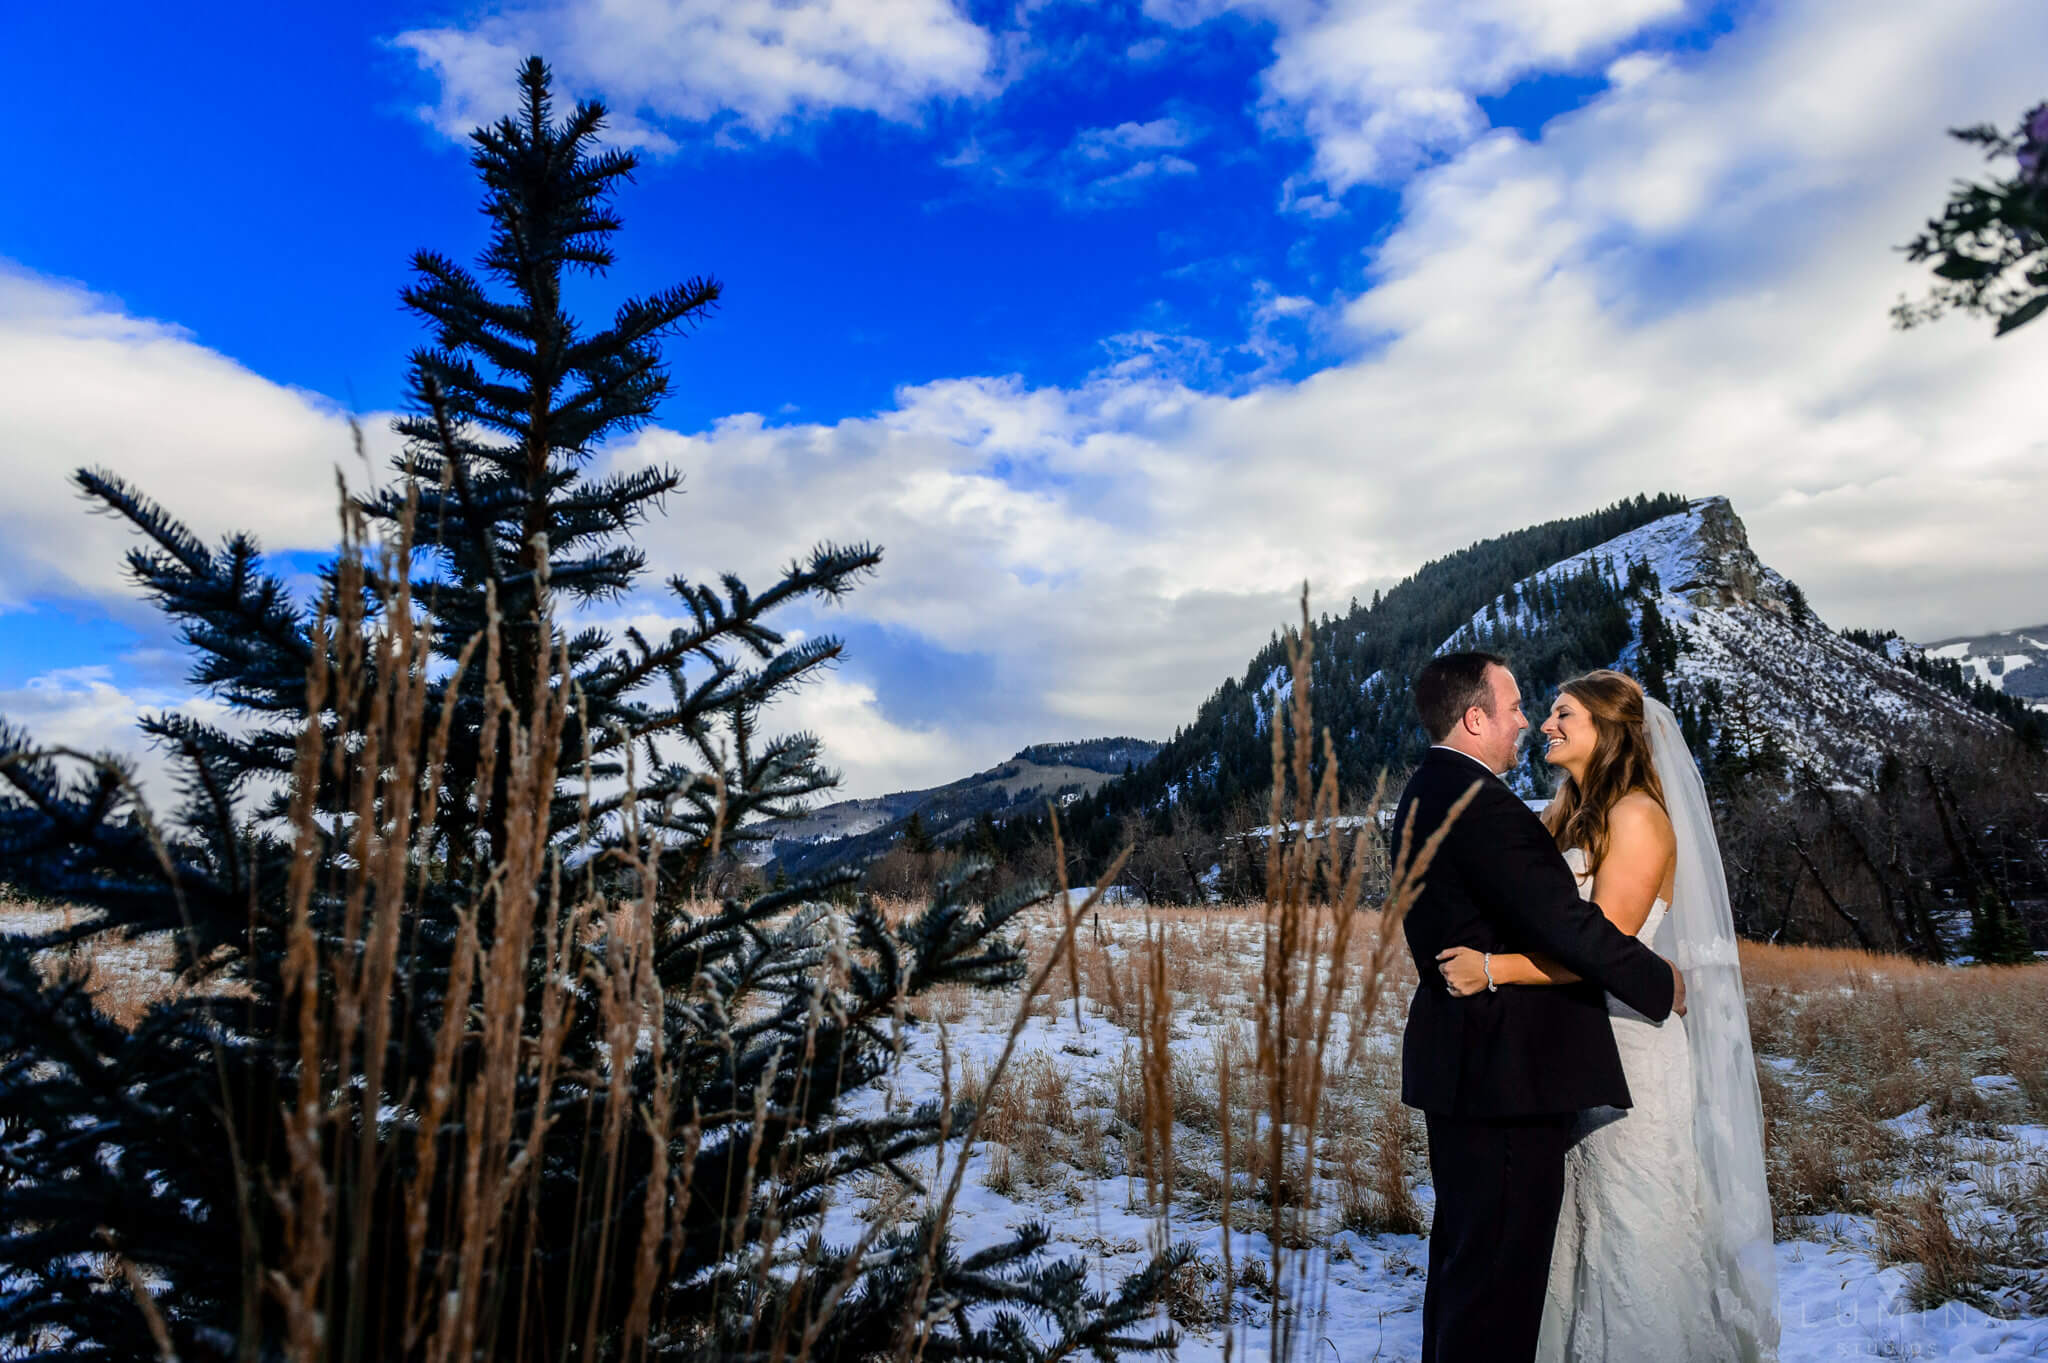 Color photo of bride and groom embracing with snowy vail landscape in background